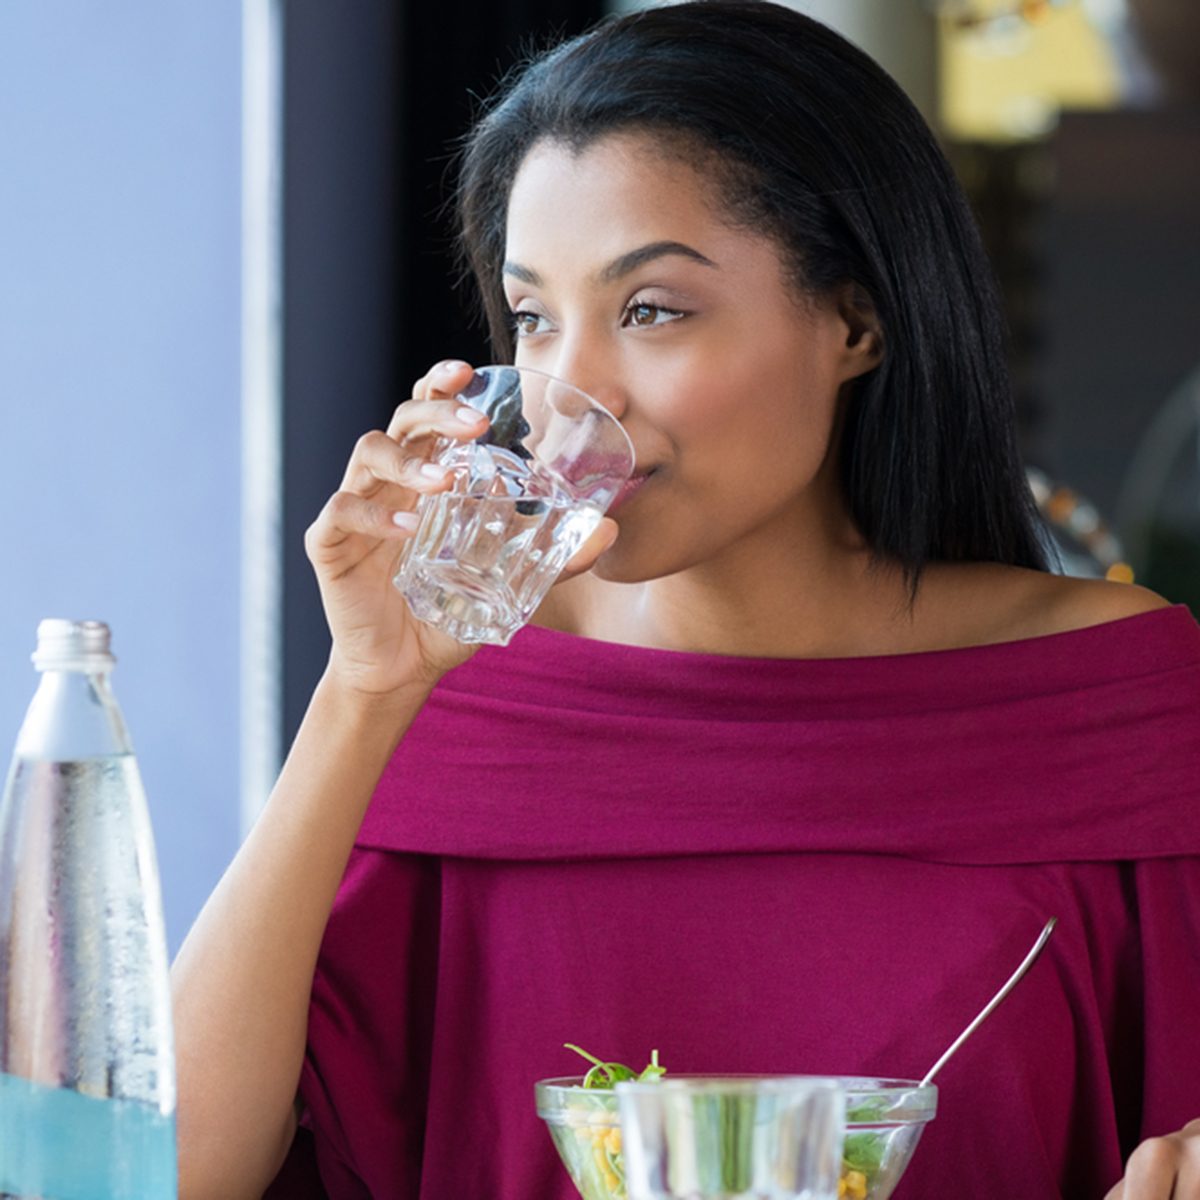 African girl drinking water during her lunch break at restaurant.